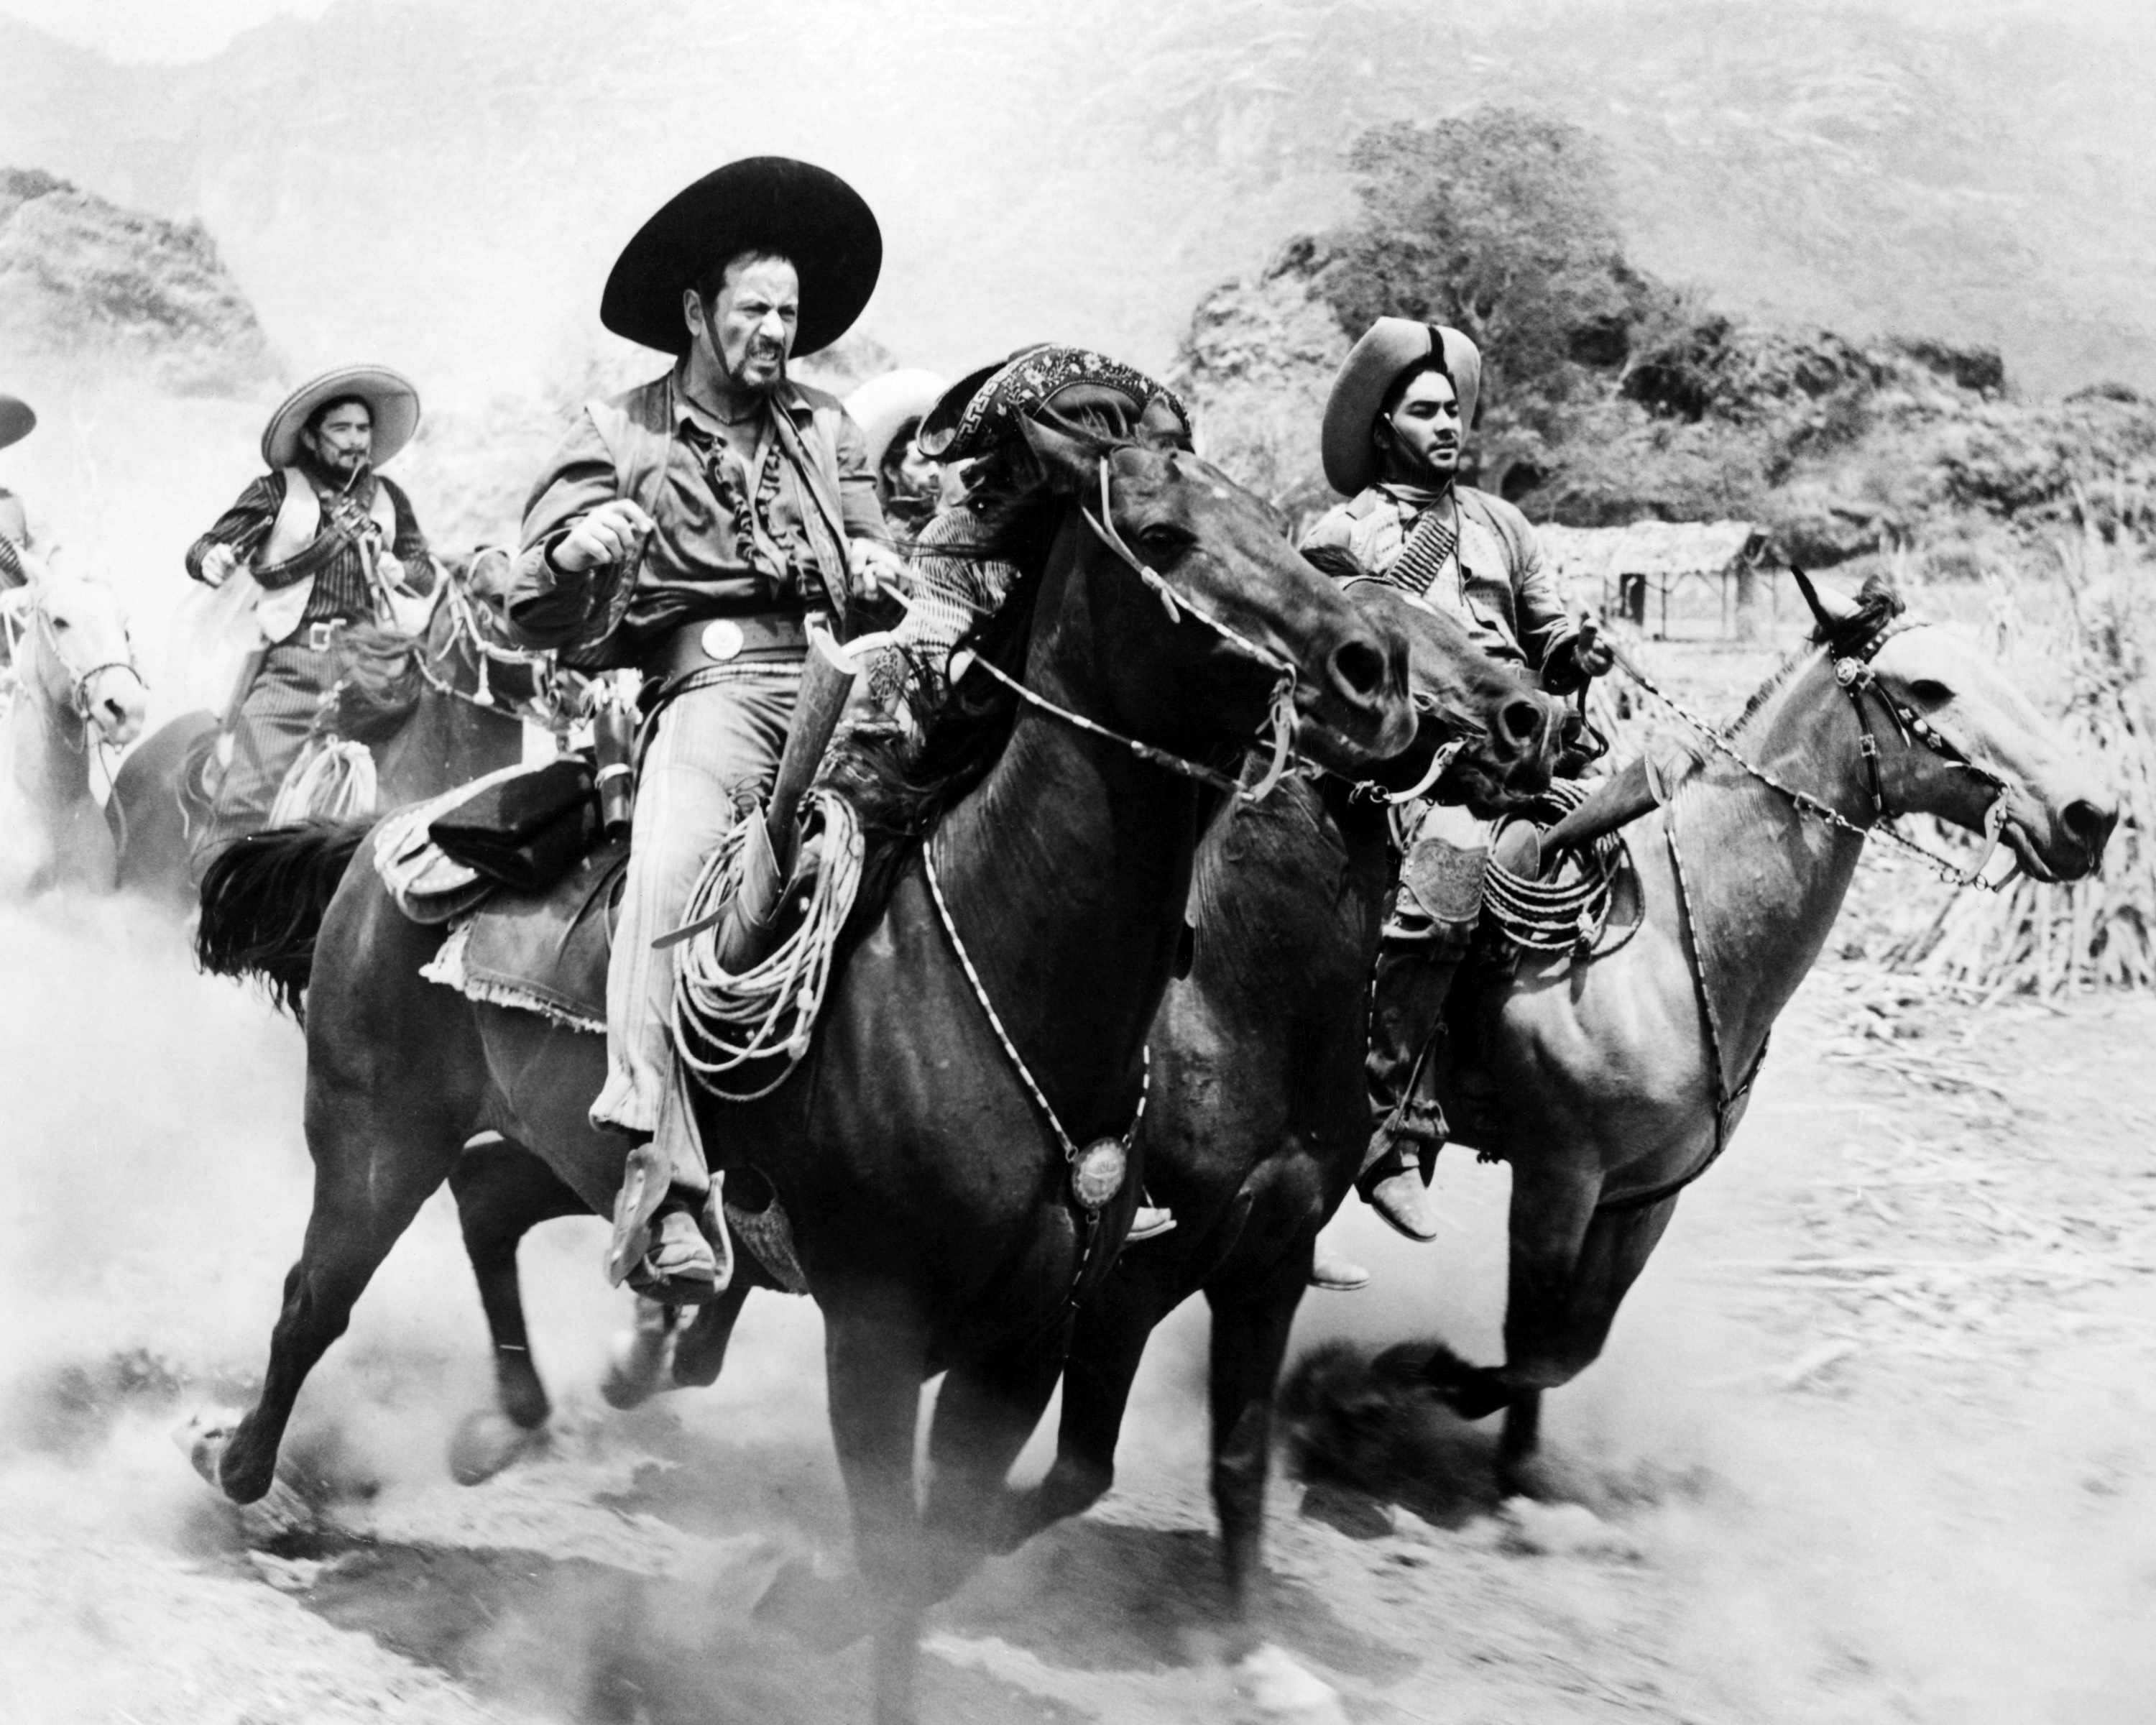 American actor Eli Wallach (foreground, left), as the bandit leader, Calvera, in 'The Magnificent Seven', directed by John Sturges, 1960. (Photo by Silver Screen Collection/Getty Images) (Silver Screen Collection—Getty Images)